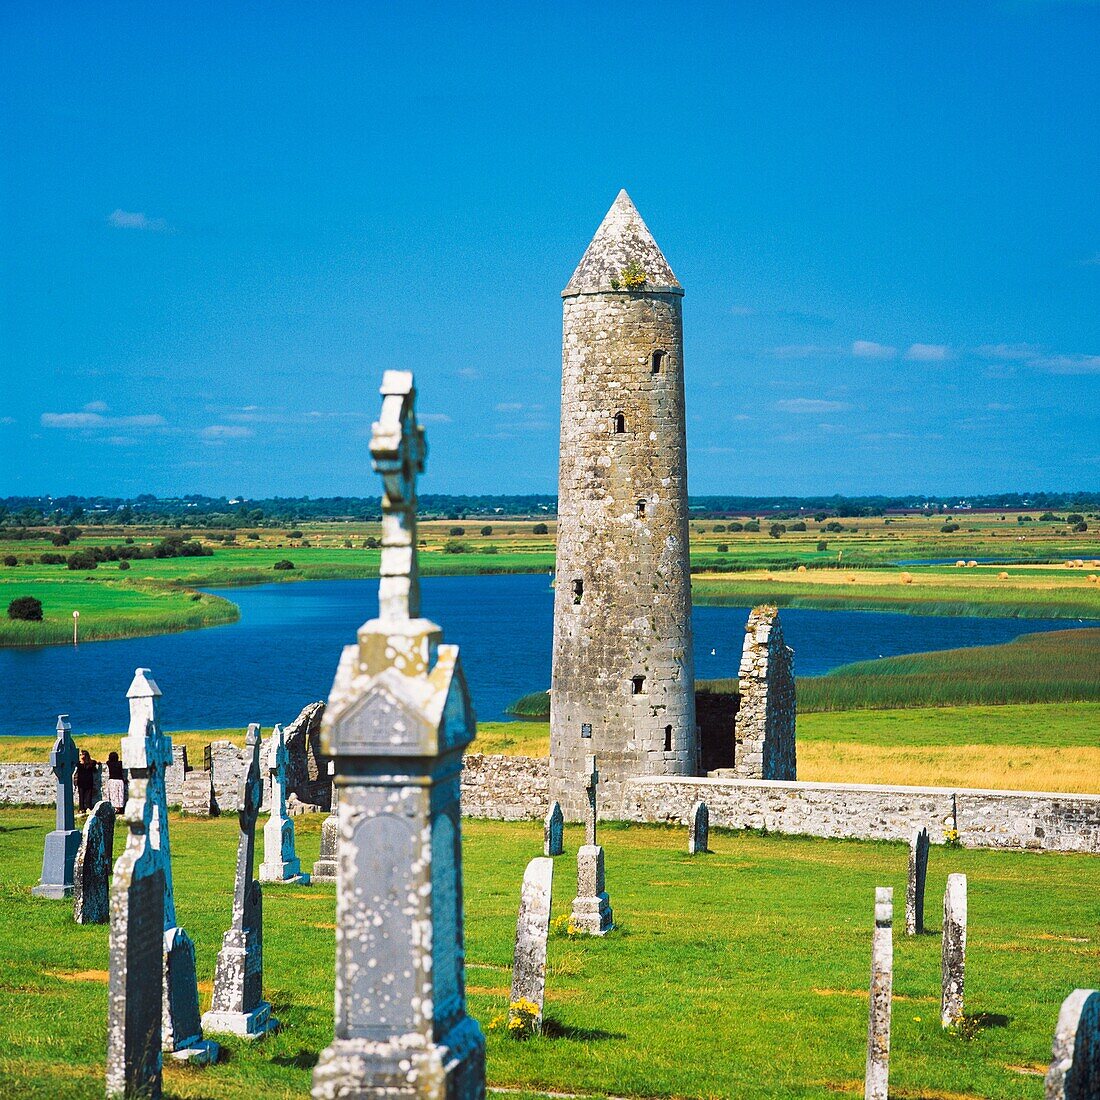 Cemetery & round tower 11th century, Clonmacnoise, county Offaly, Ireland